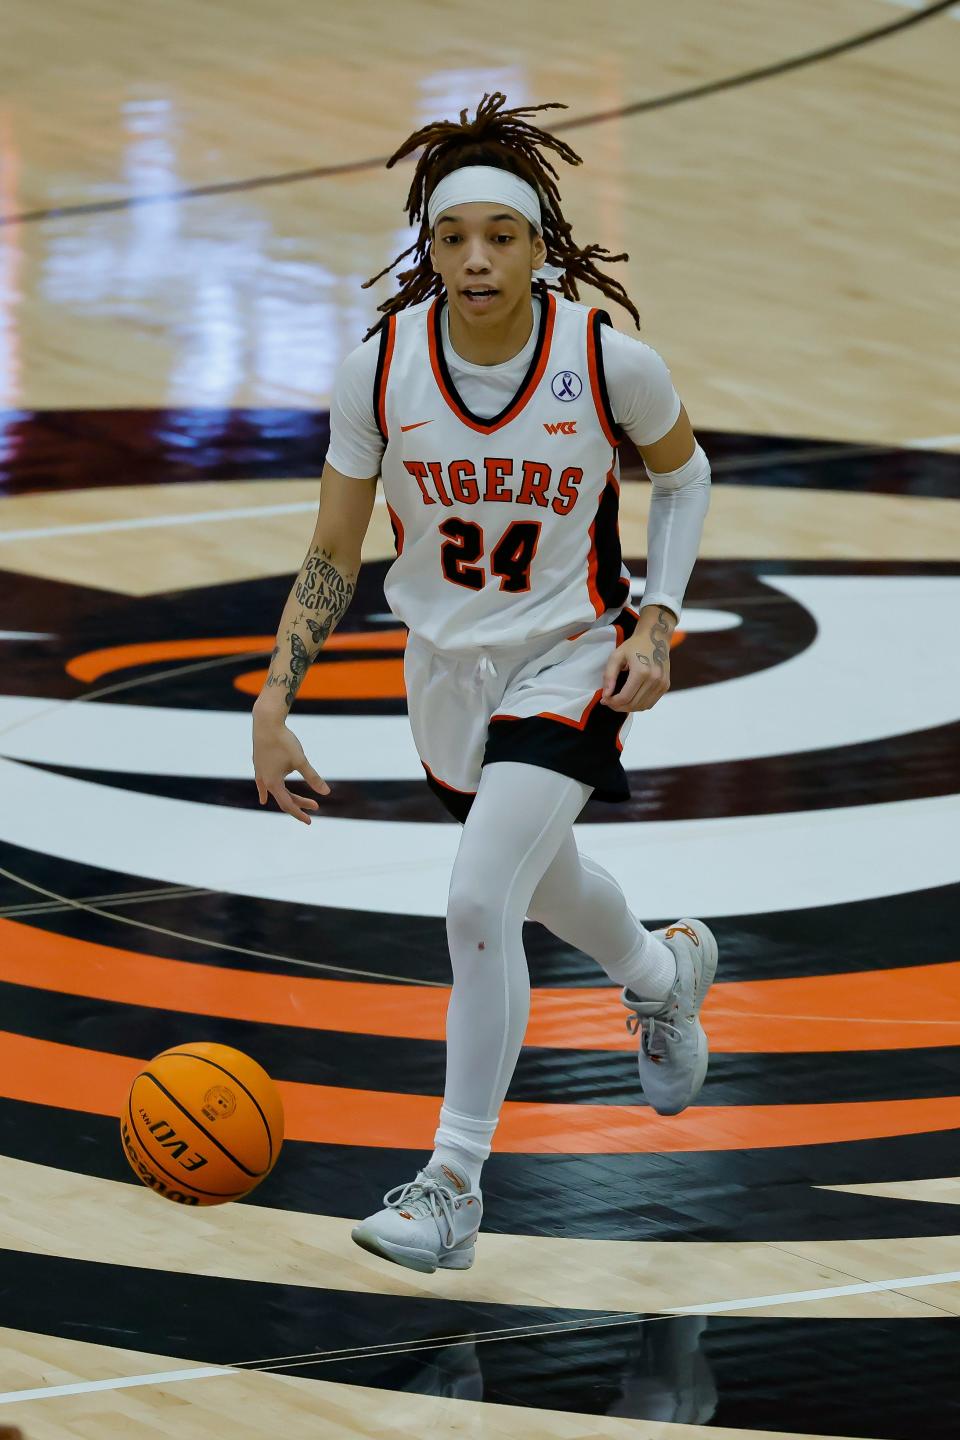 Senior Guard Liz Smith(24) sets up the offense during a Women’s NIT first round game against Cal Poly at UOP’s Alex G. Spanos Center in Stockton, CA